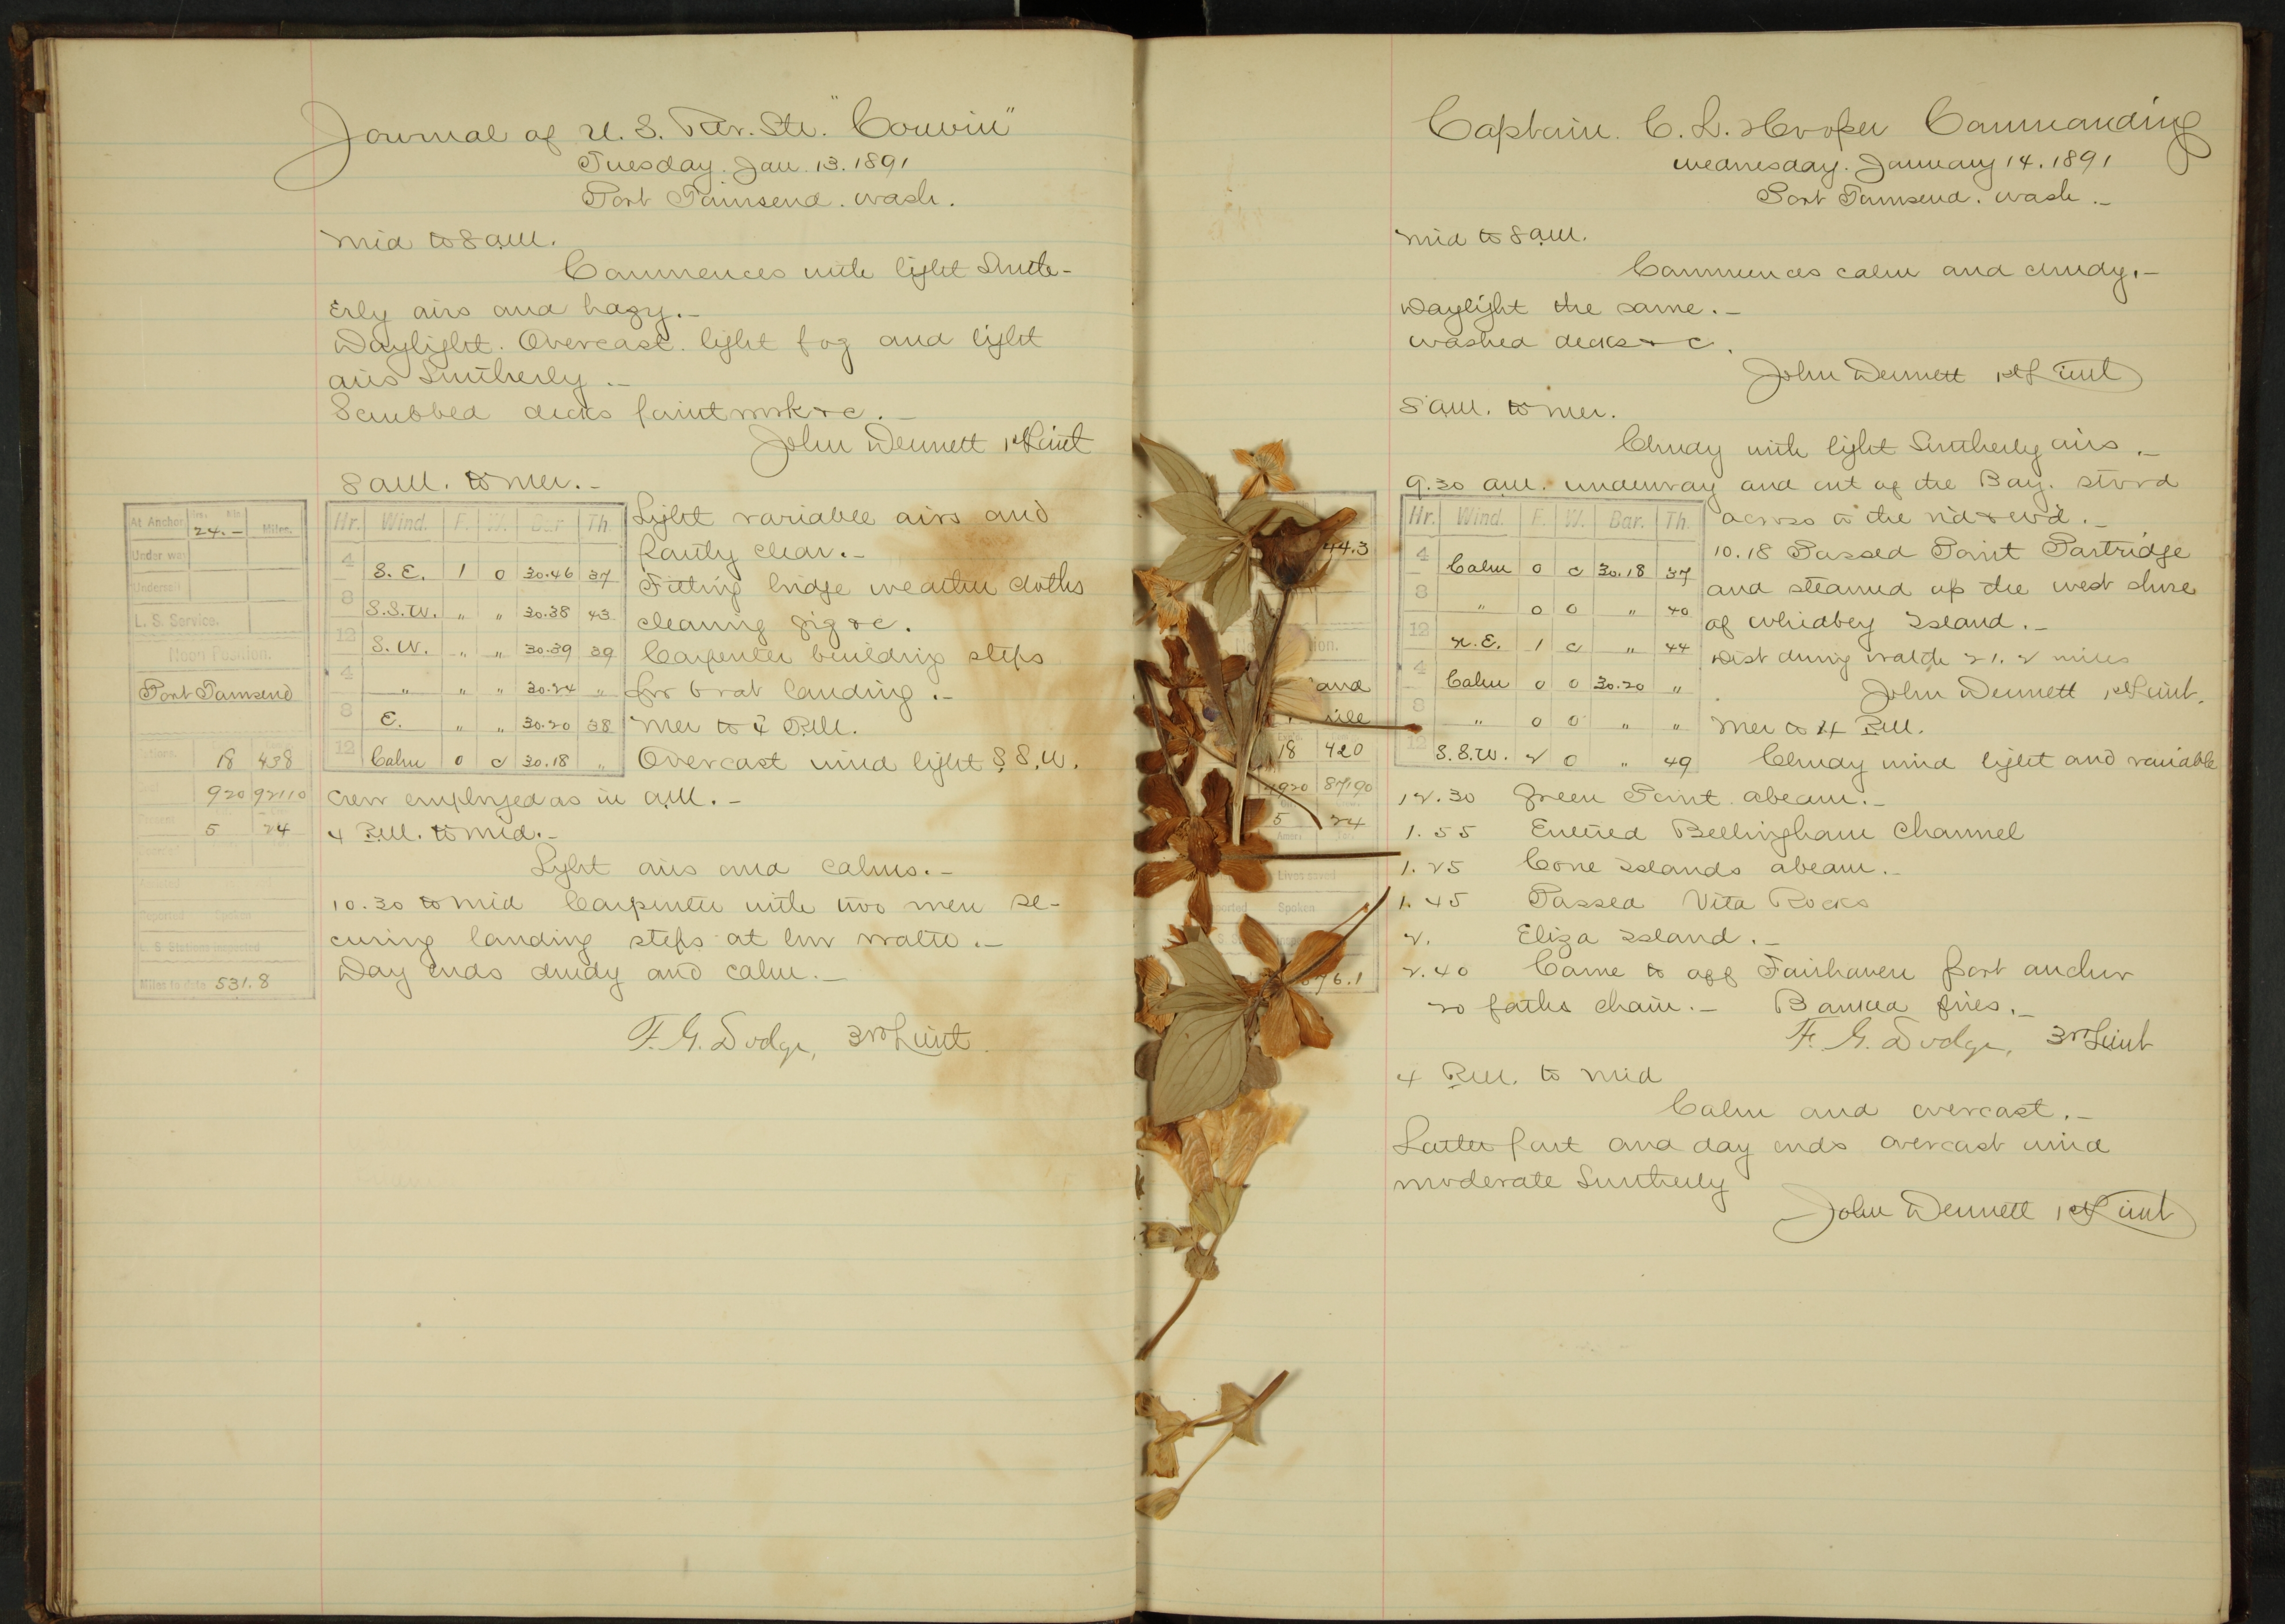 USRC Corwin log entry with pressed flowers